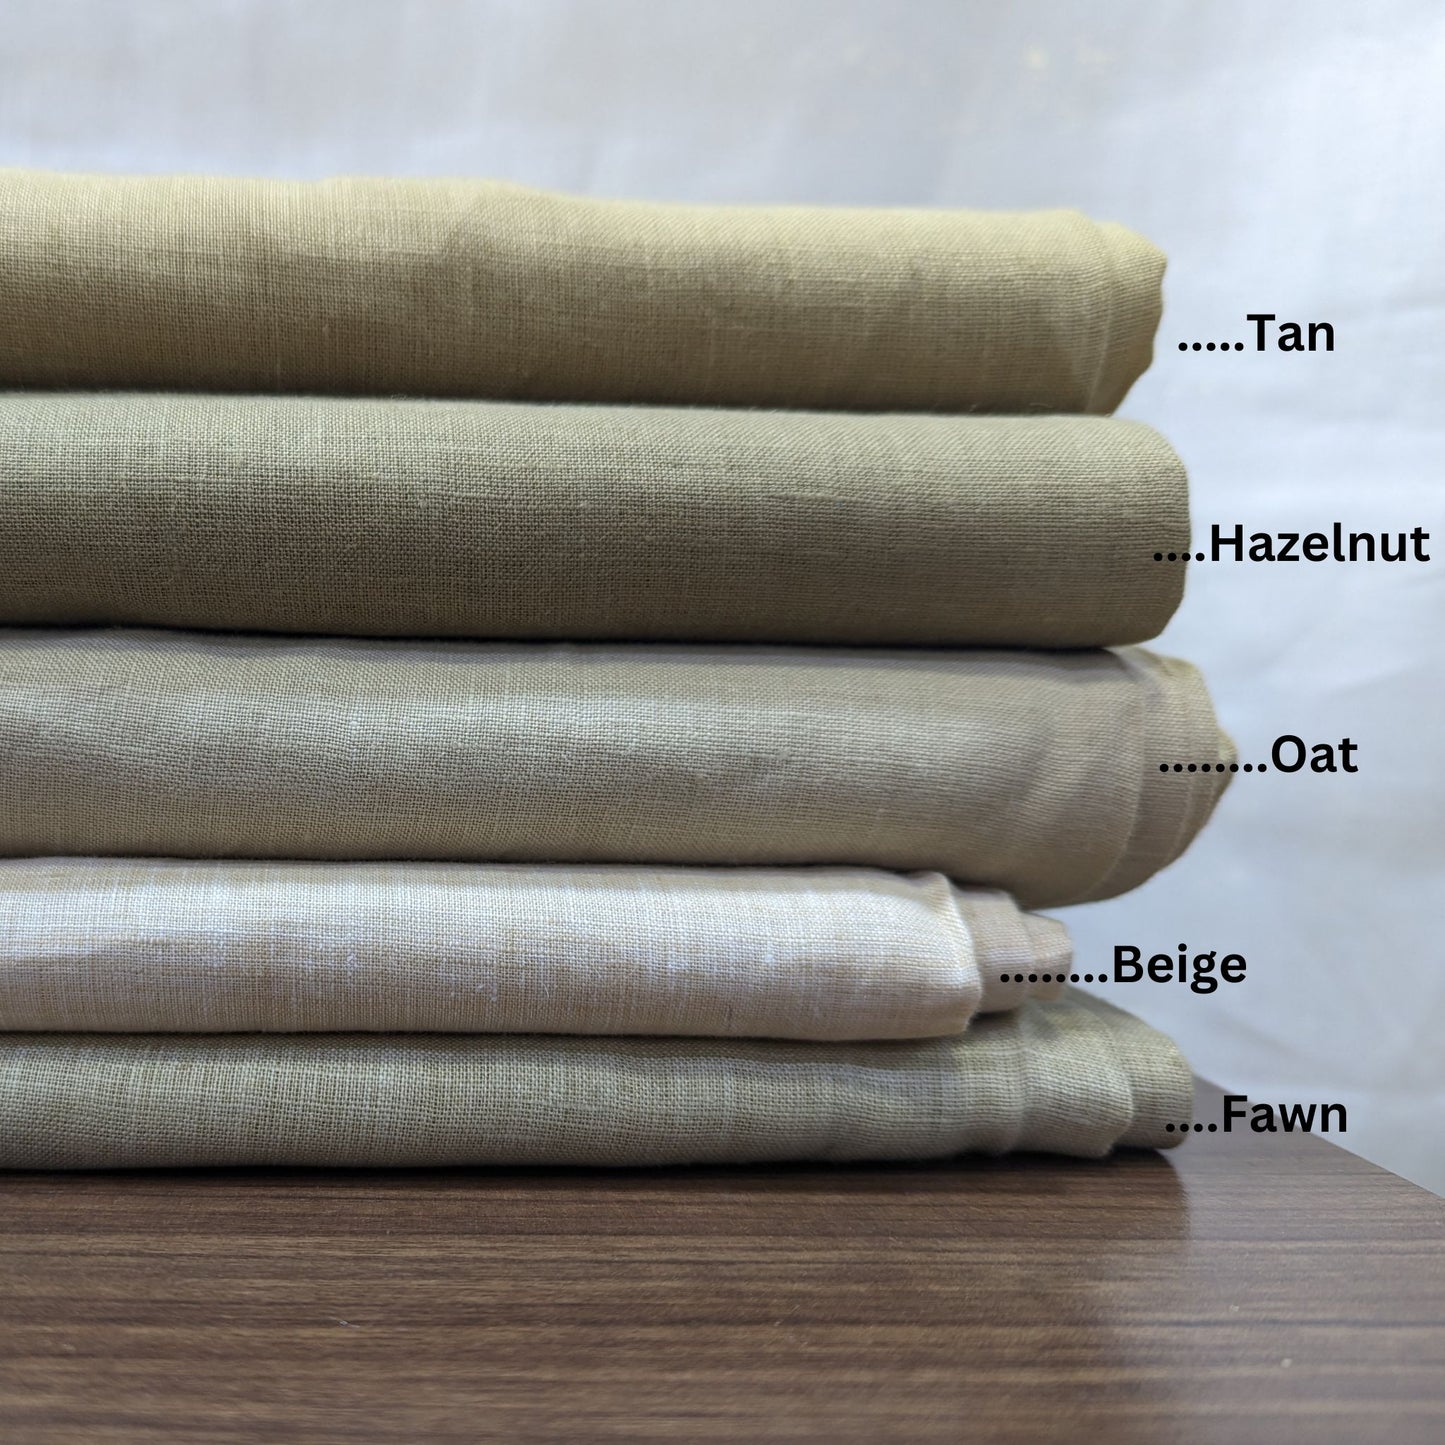 Summer Tans: Shirting, Pure Linen Fabric, Used for Shirts, Dresses, Tops - OrganoLinen